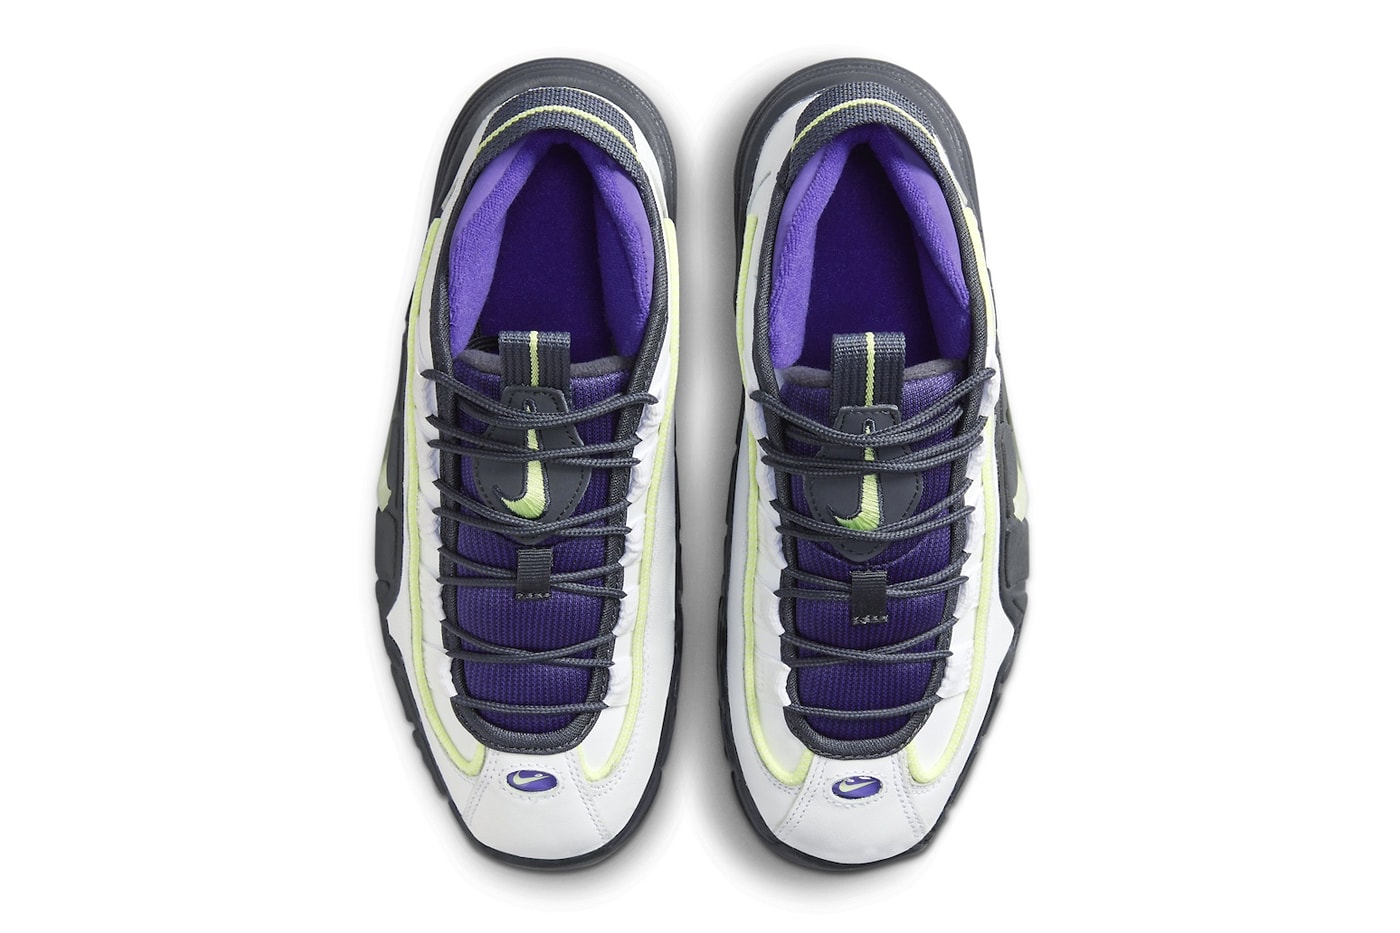 Nike Air Max Penny 1 "Penny Story" Has a 2024 Release Date FZ4043-100 White/Light Lemon Twist-Field Purple-Anthracite february 10 2024 penny hardaway stussy swoosh high tops basketbal lshoes